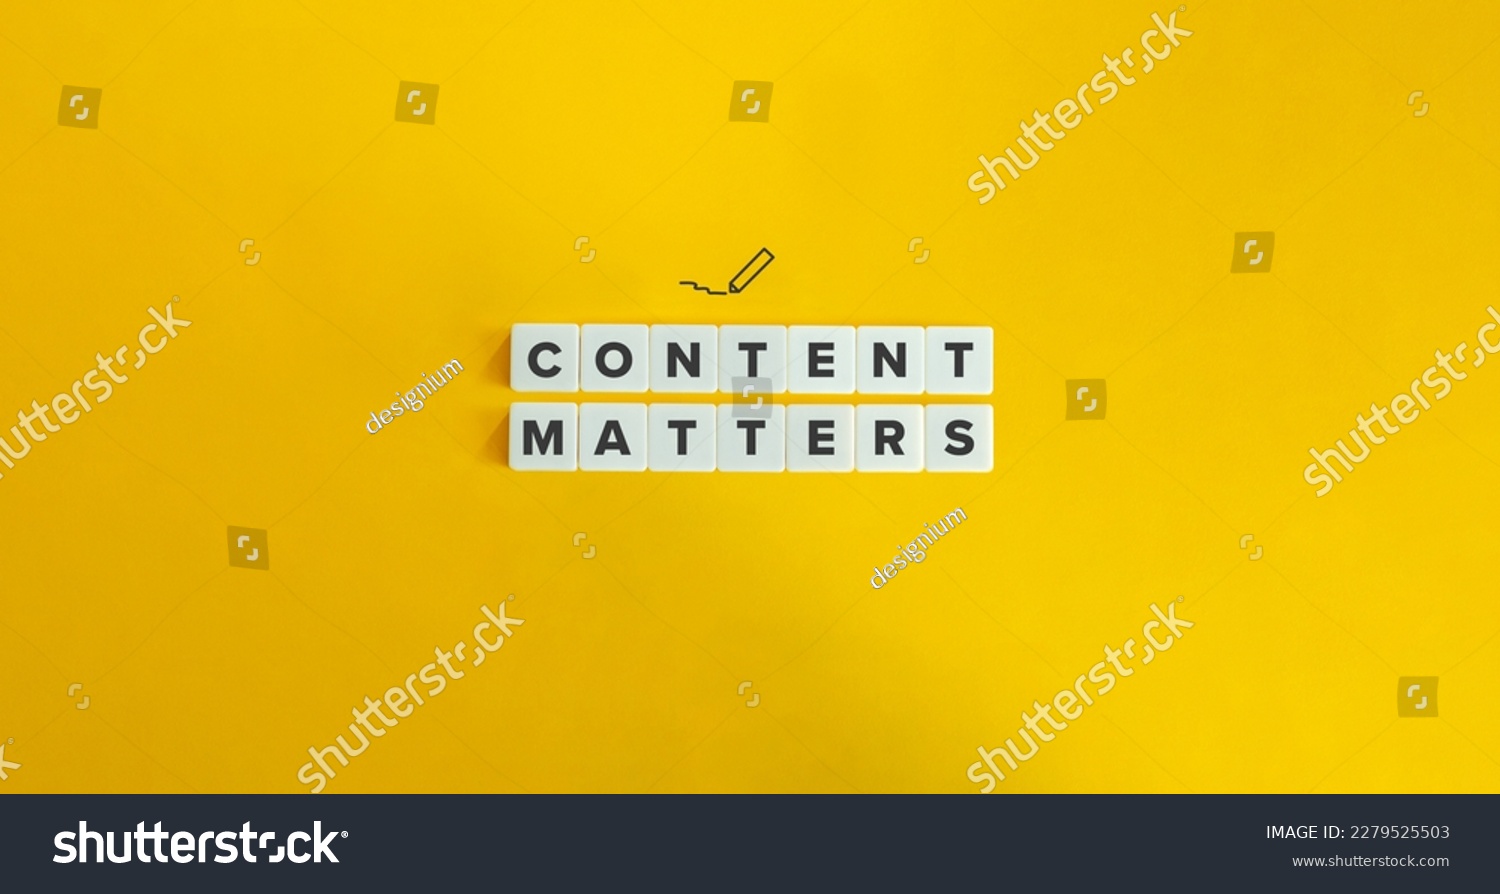 Content Matters Banner. Inbound Marketing and Social Media Concept. Letter Tiles on Yellow Background. Minimal Aesthetics. #2279525503